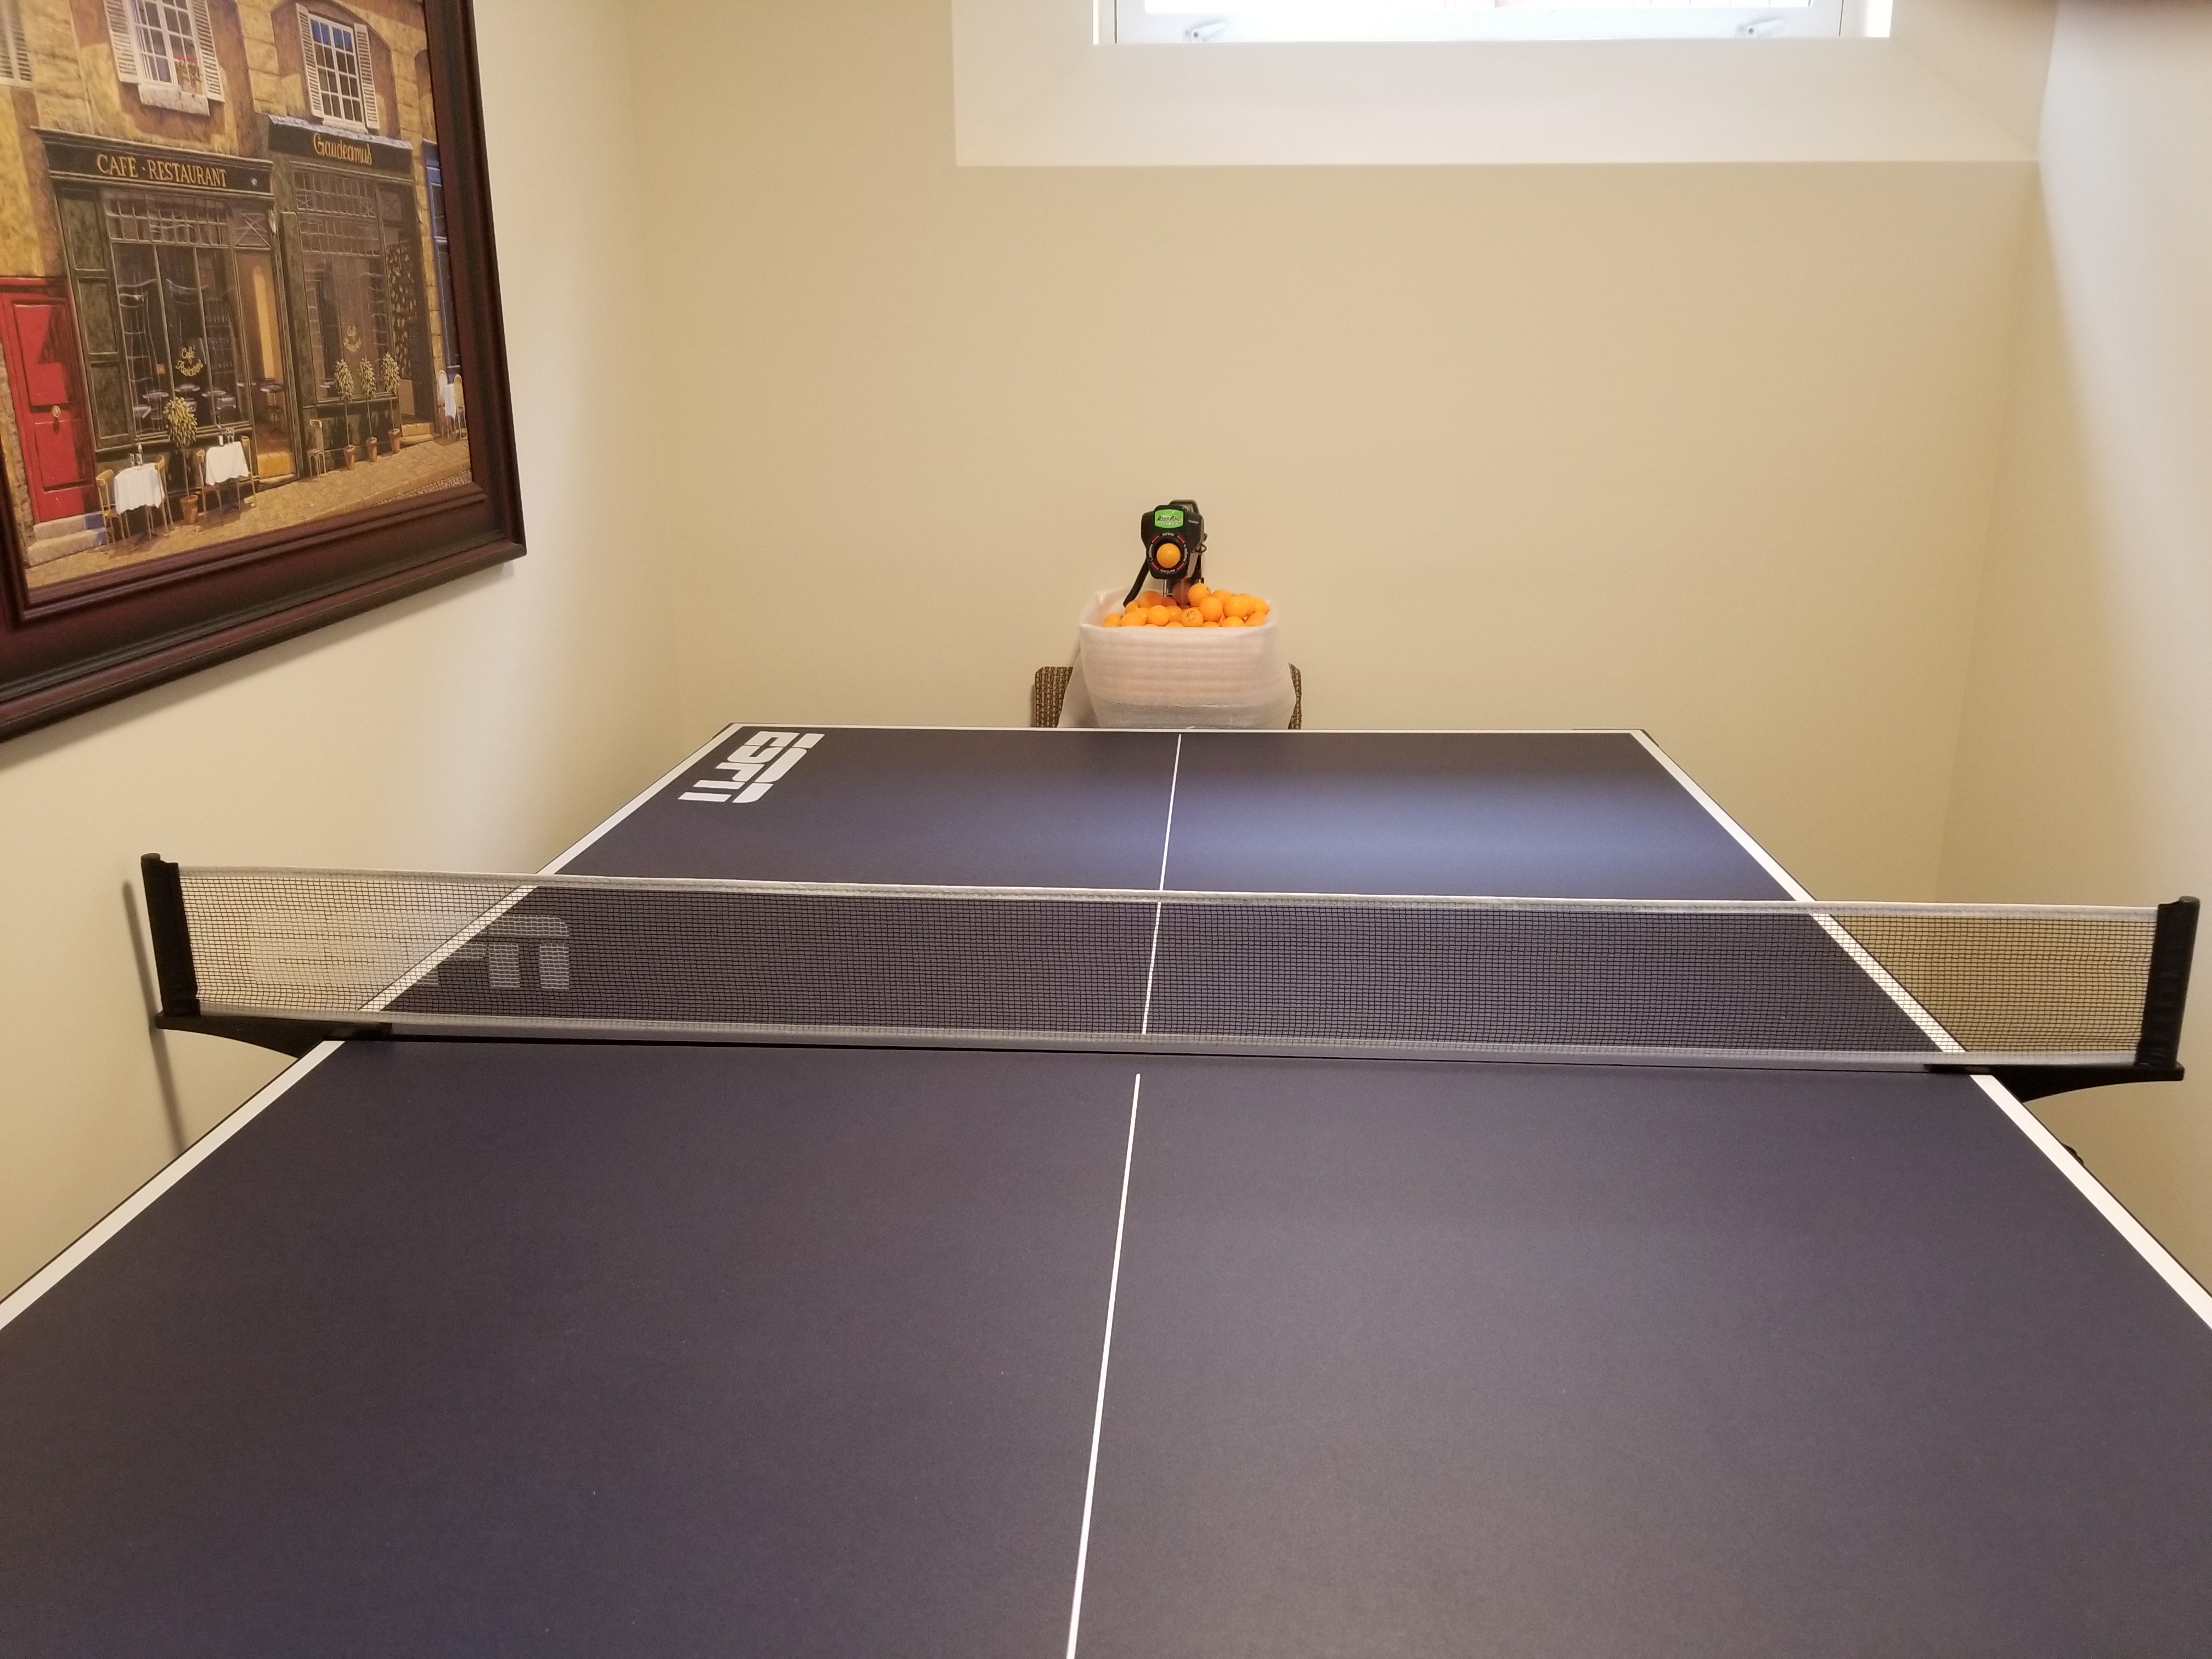 Setting up Table Tennis Table & Robot in Your Basement